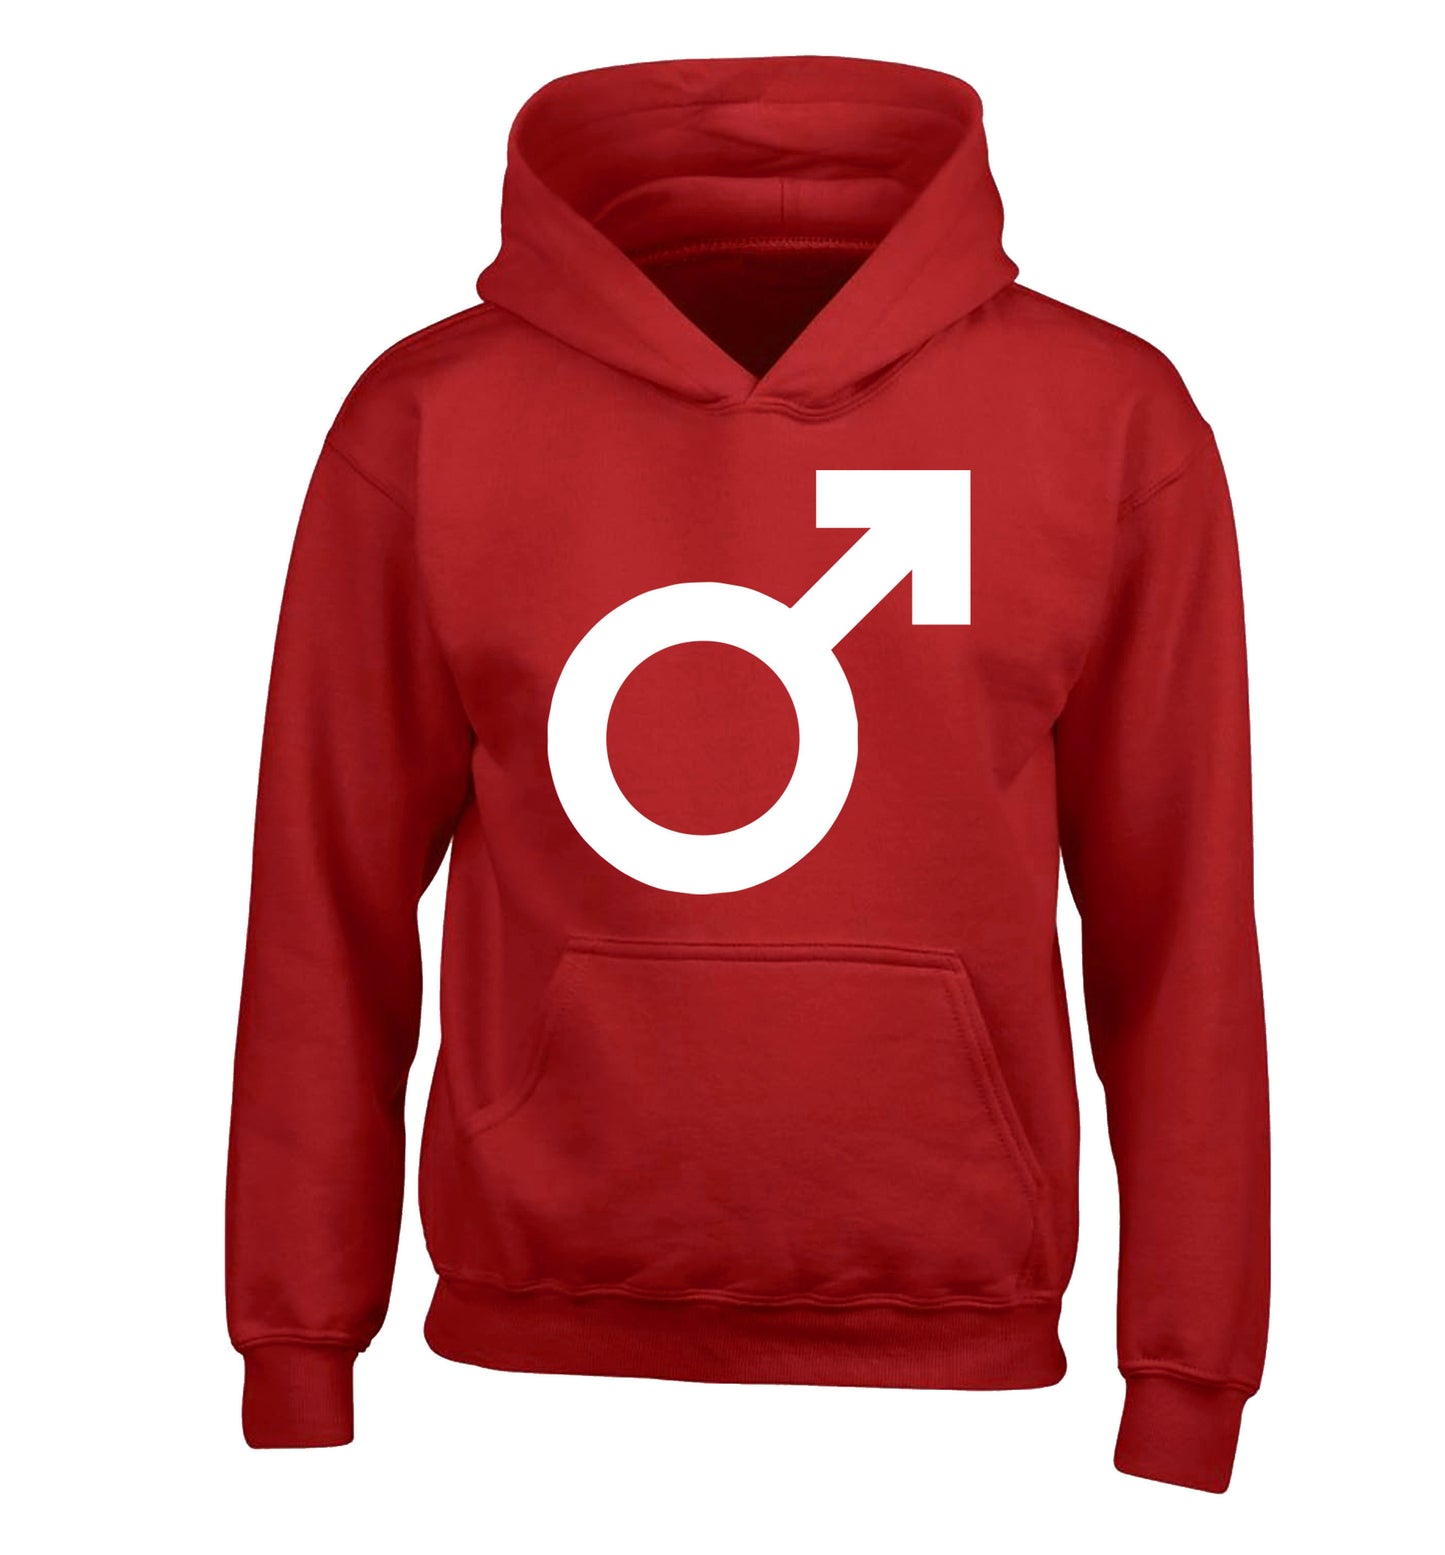 Male symbol large children's red hoodie 12-14 Years